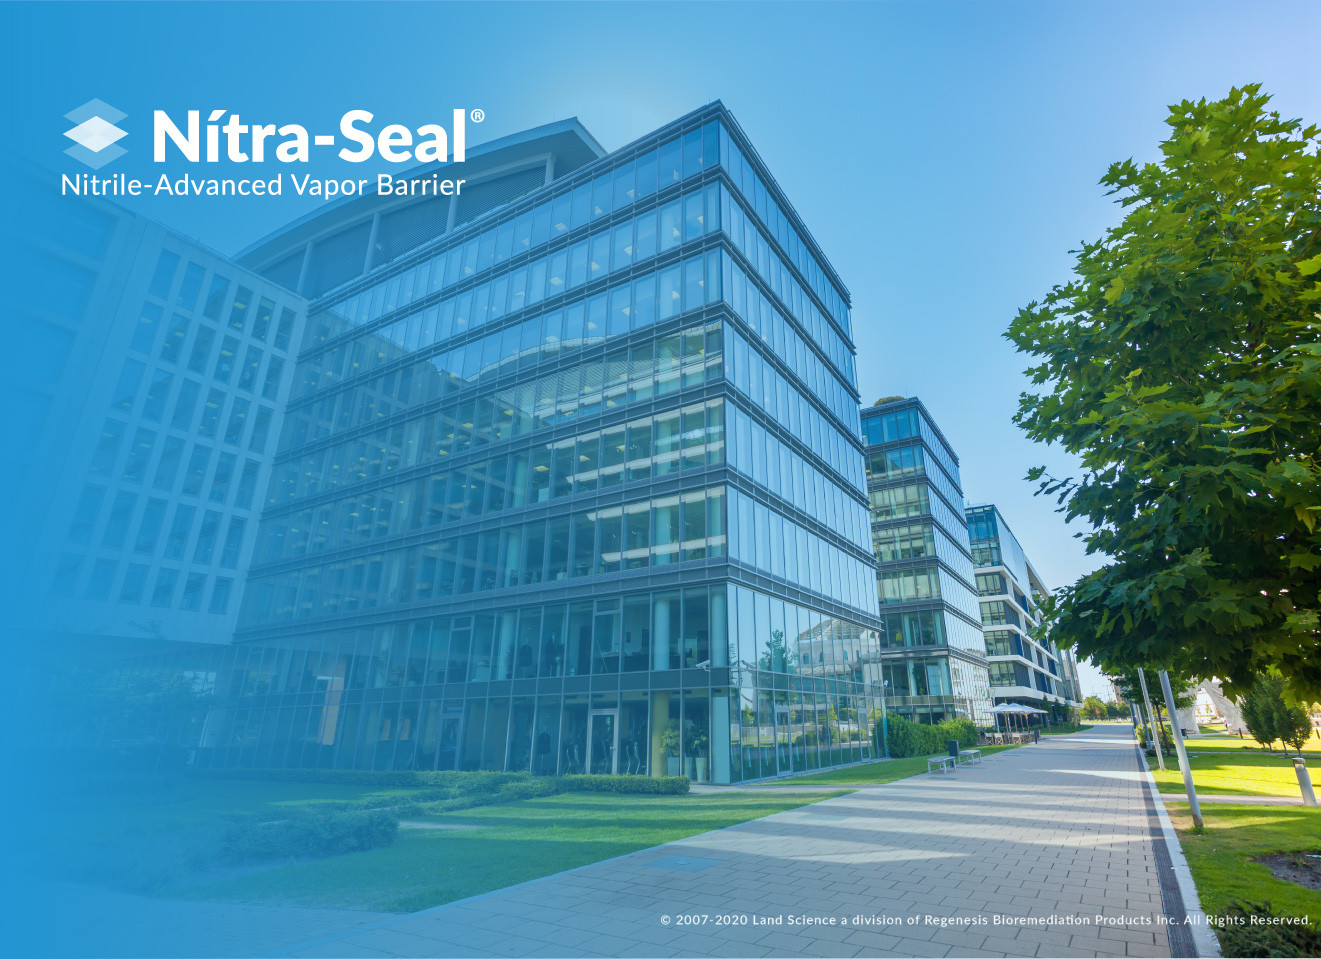 Nitra-Seal Ensures Worker Safety For New Office Campus